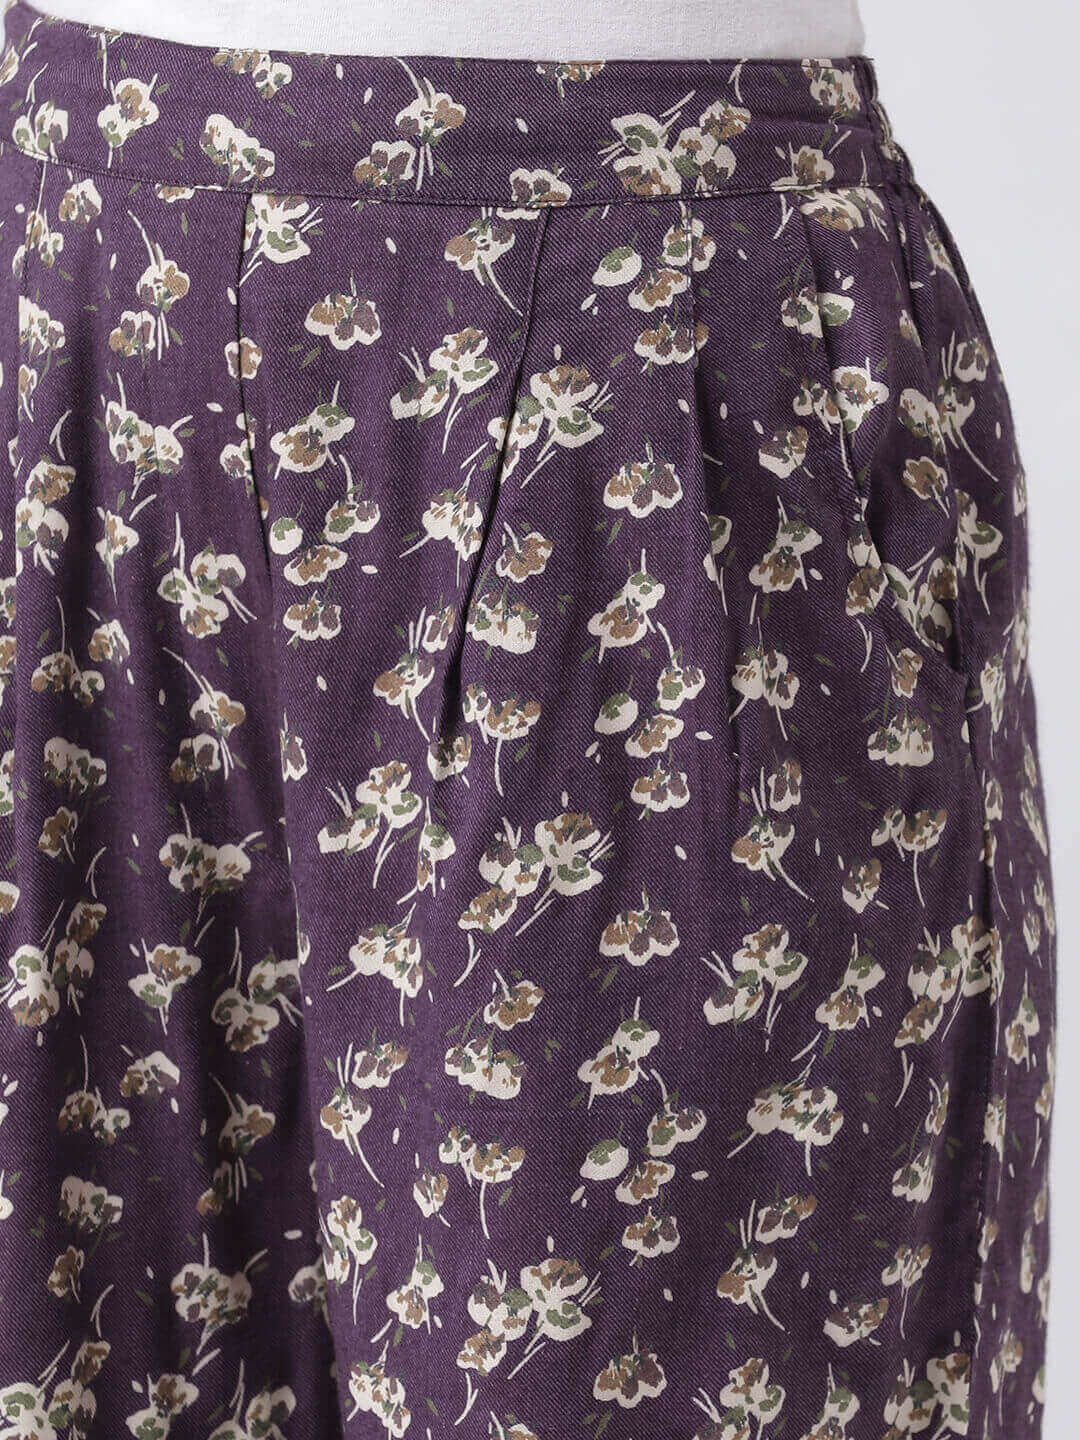 The Vanca'S Floral Woven Culottes With Pleats In The Front